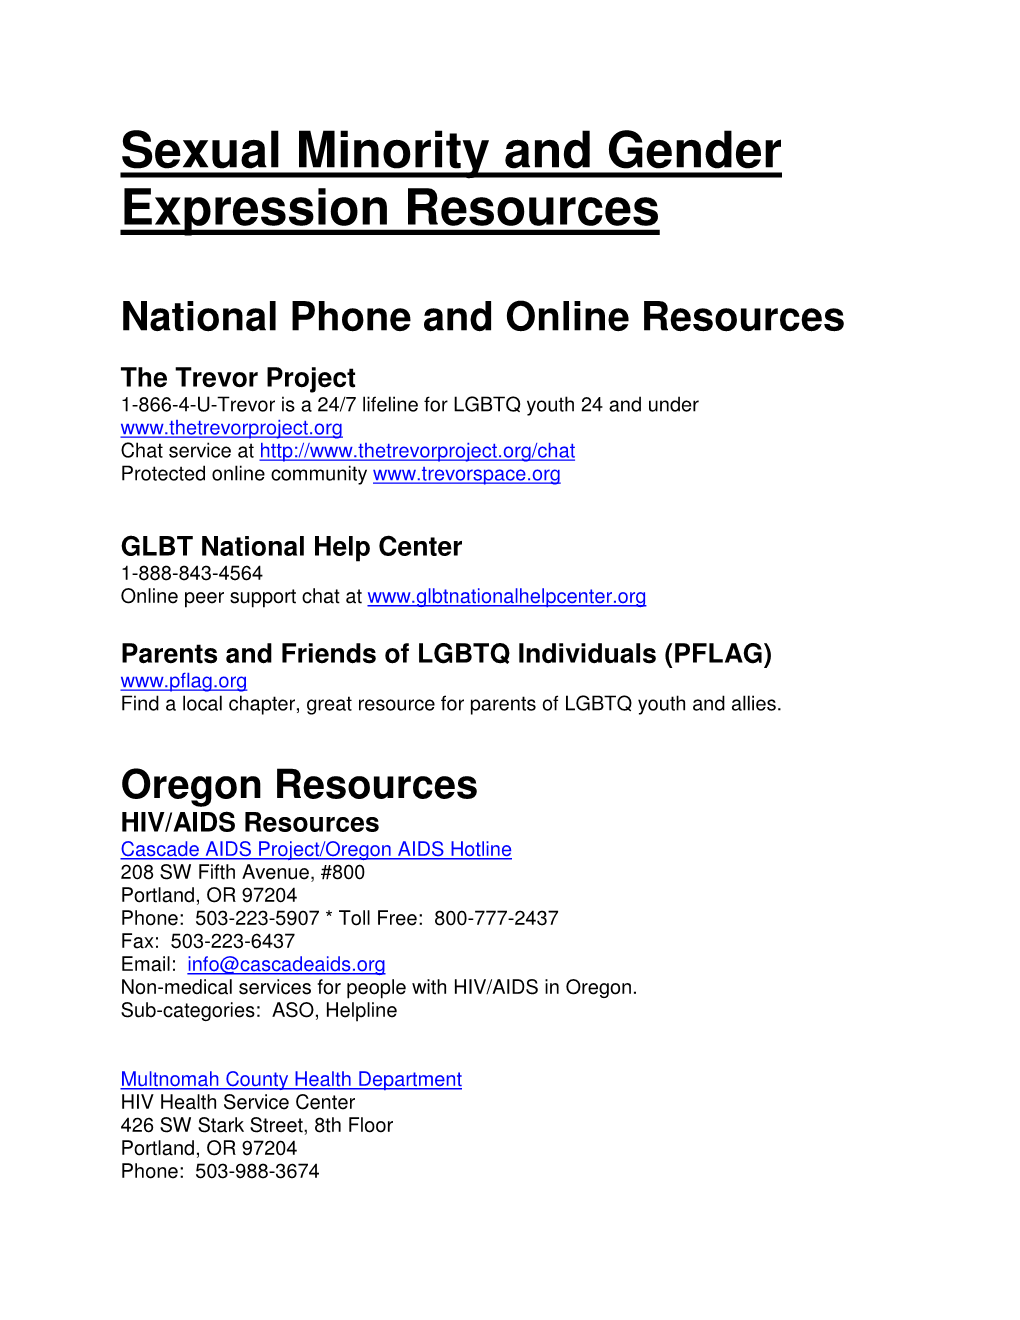 Sexual Minority and Gender Expression Resources